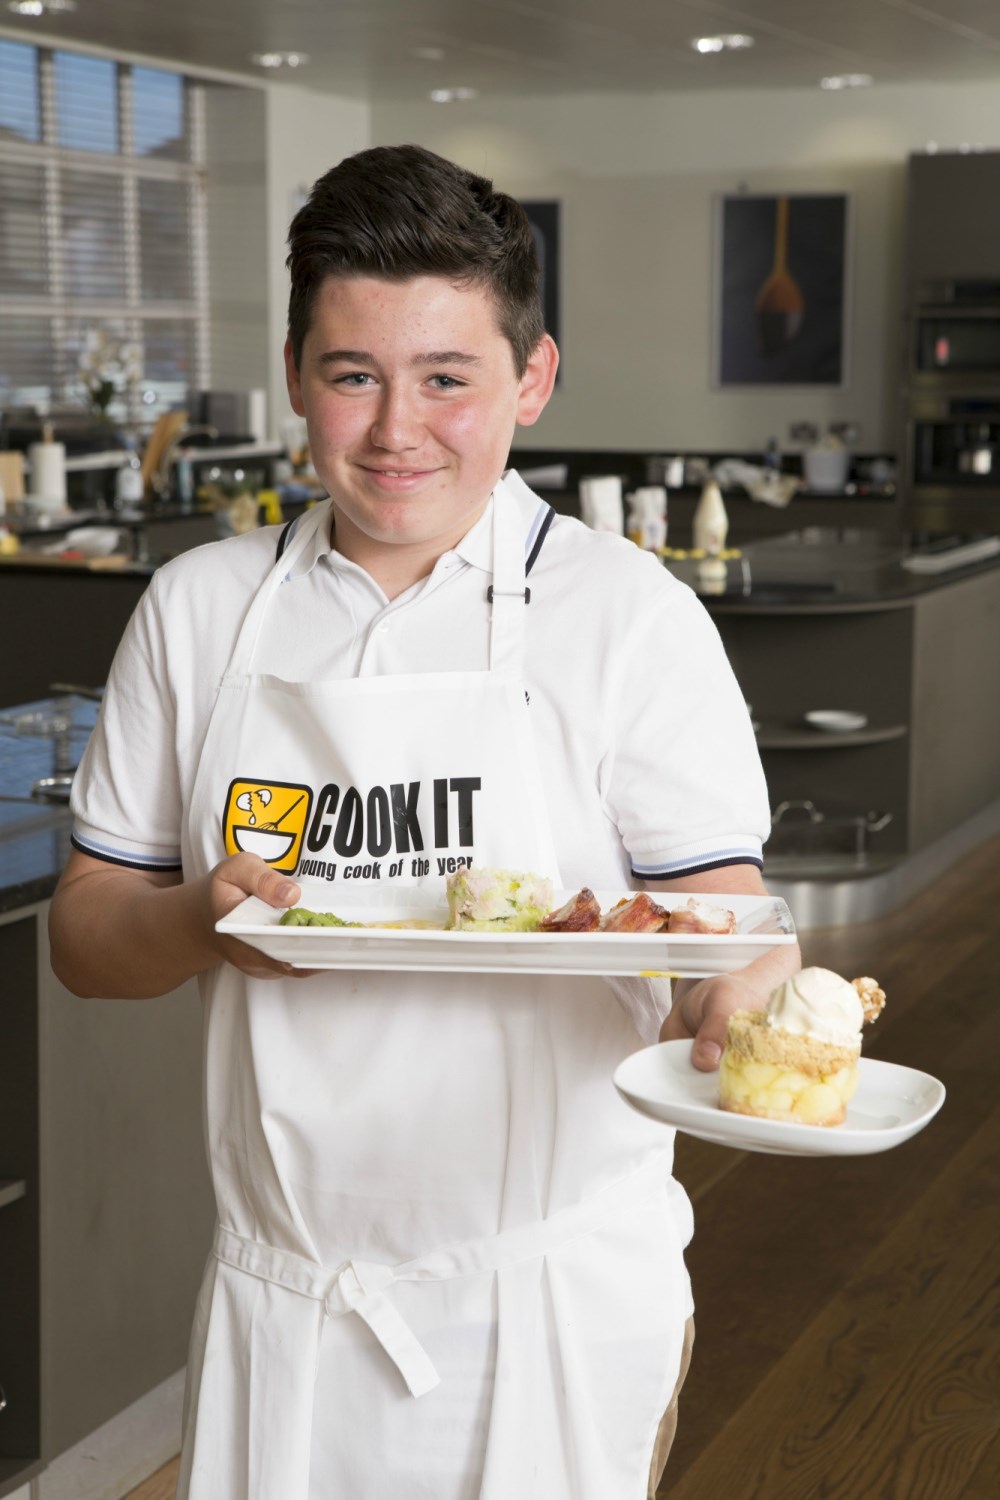 George Perry with his winning dishes